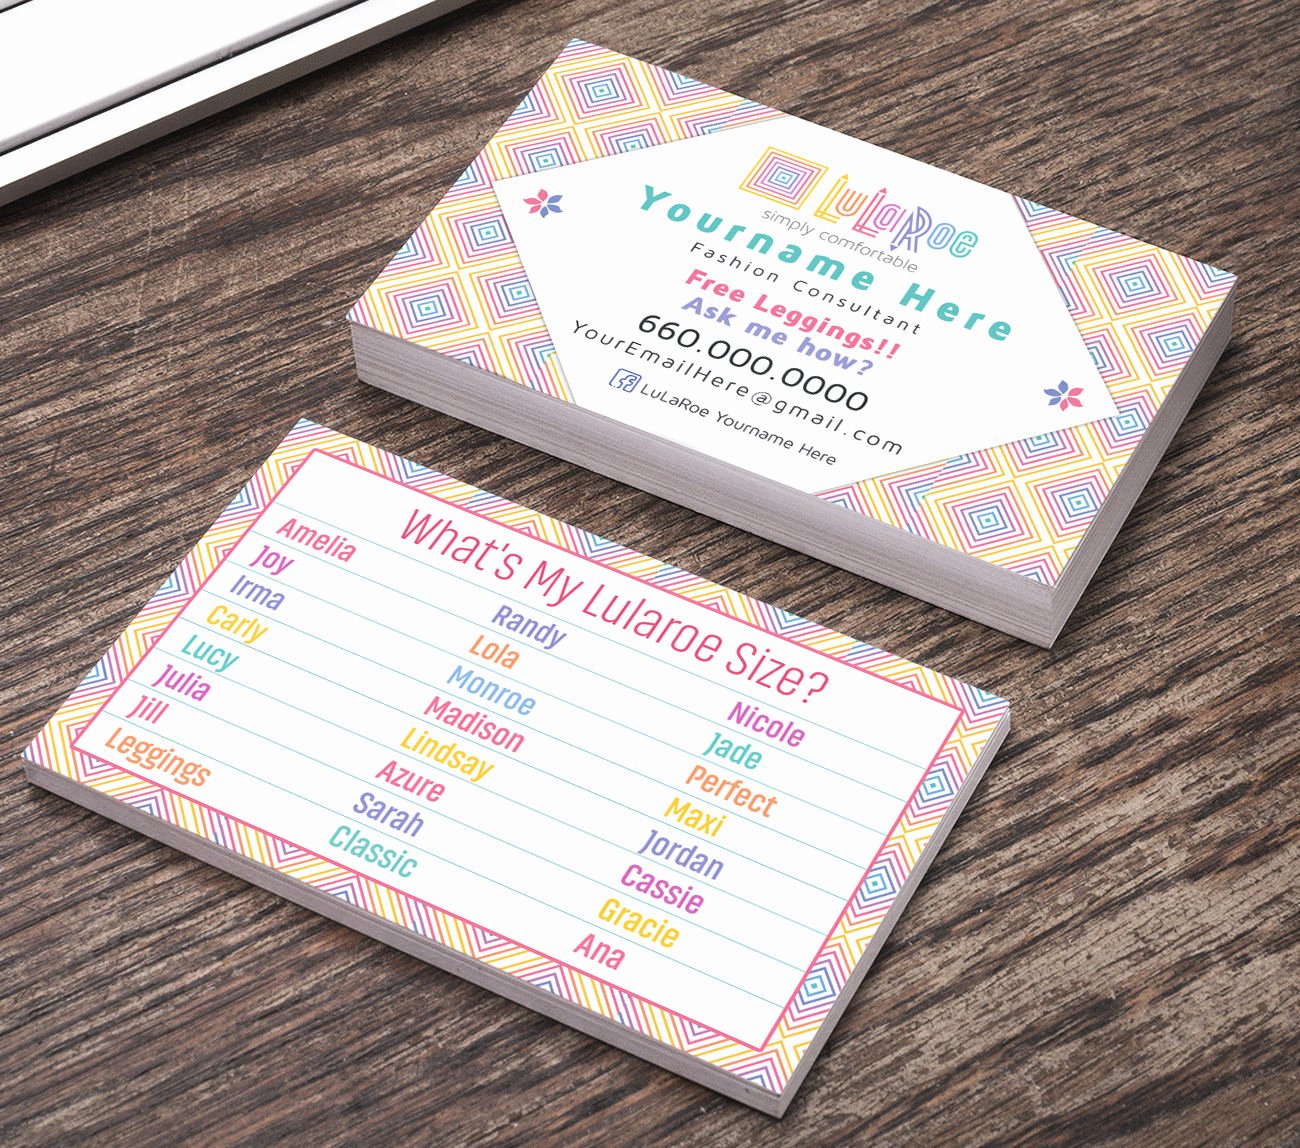 250 Free Business Cards Business Card Design